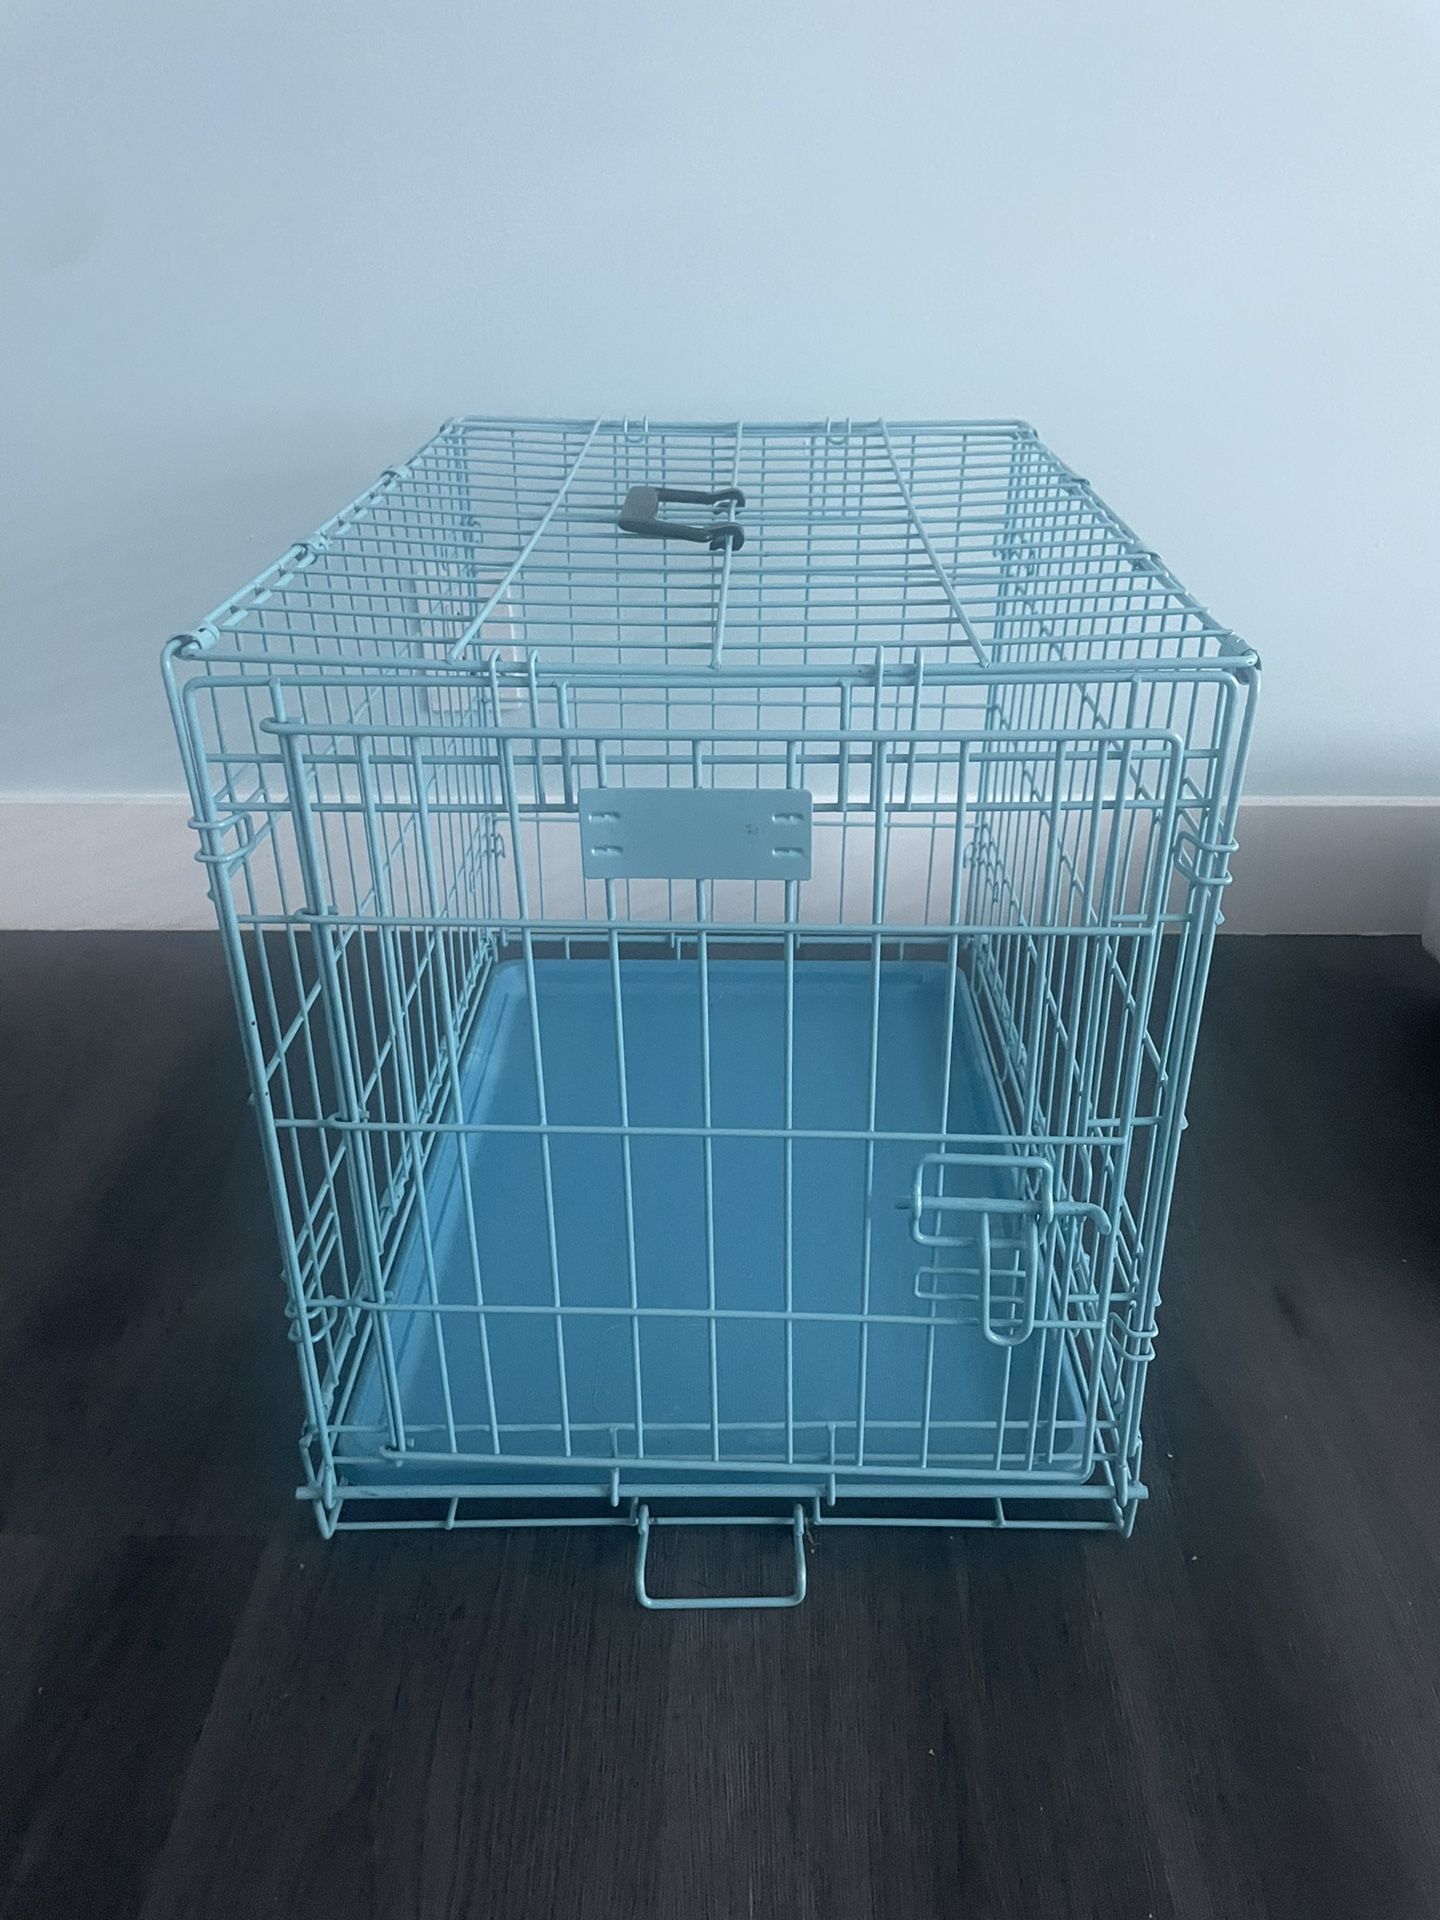 Blue Small Dog Kennel Indoor Metal Dog Crate 